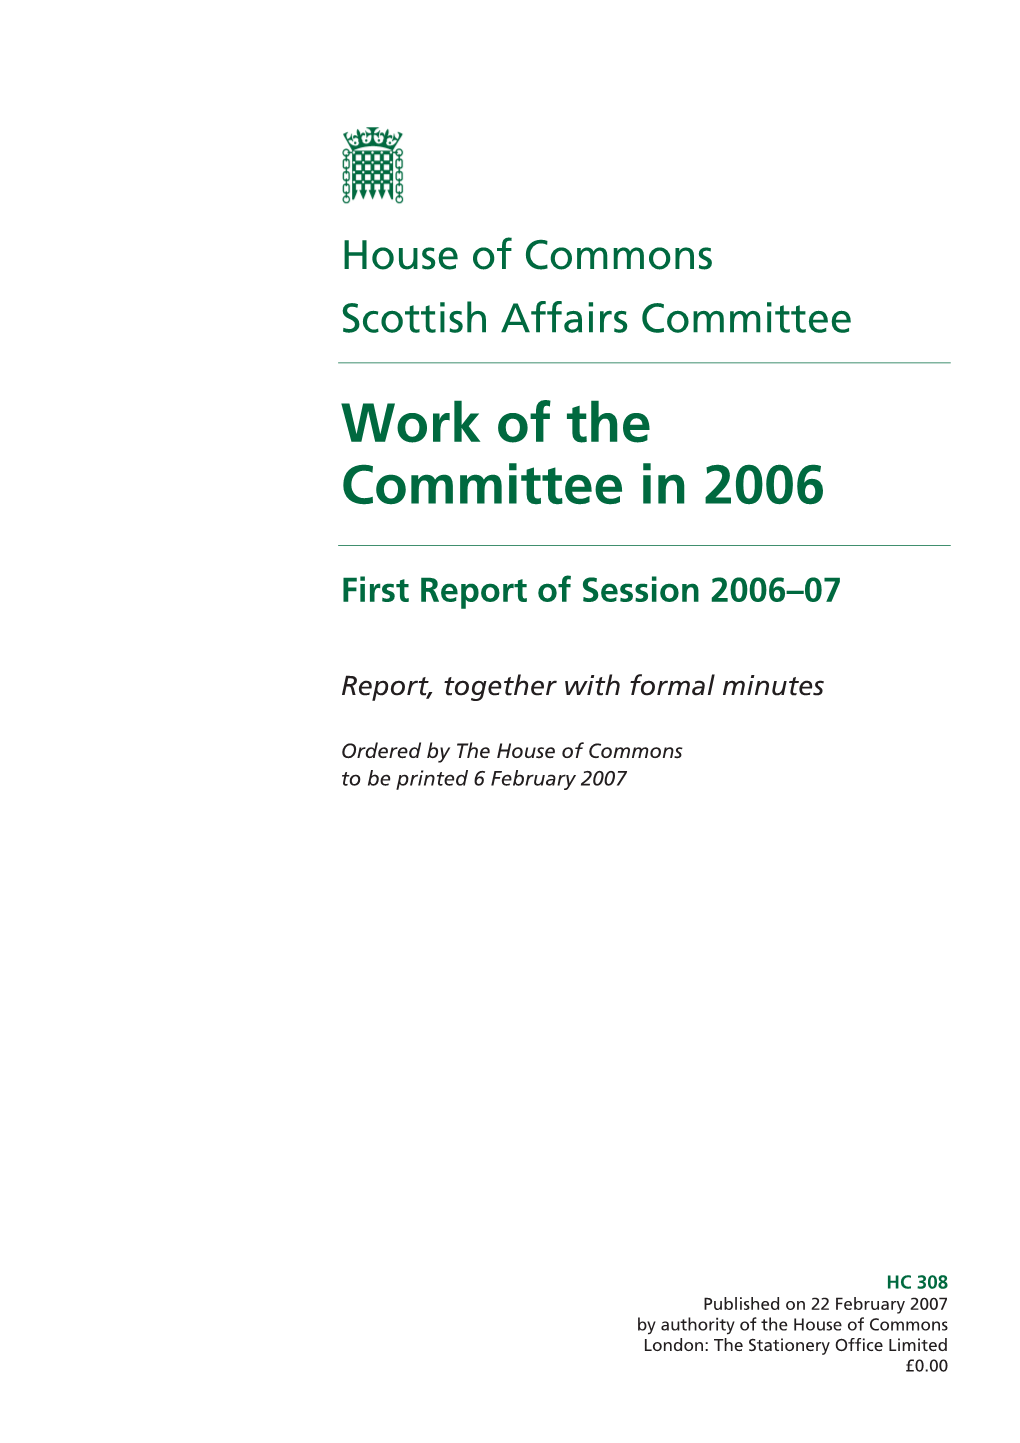 Work of the Committee in 2006